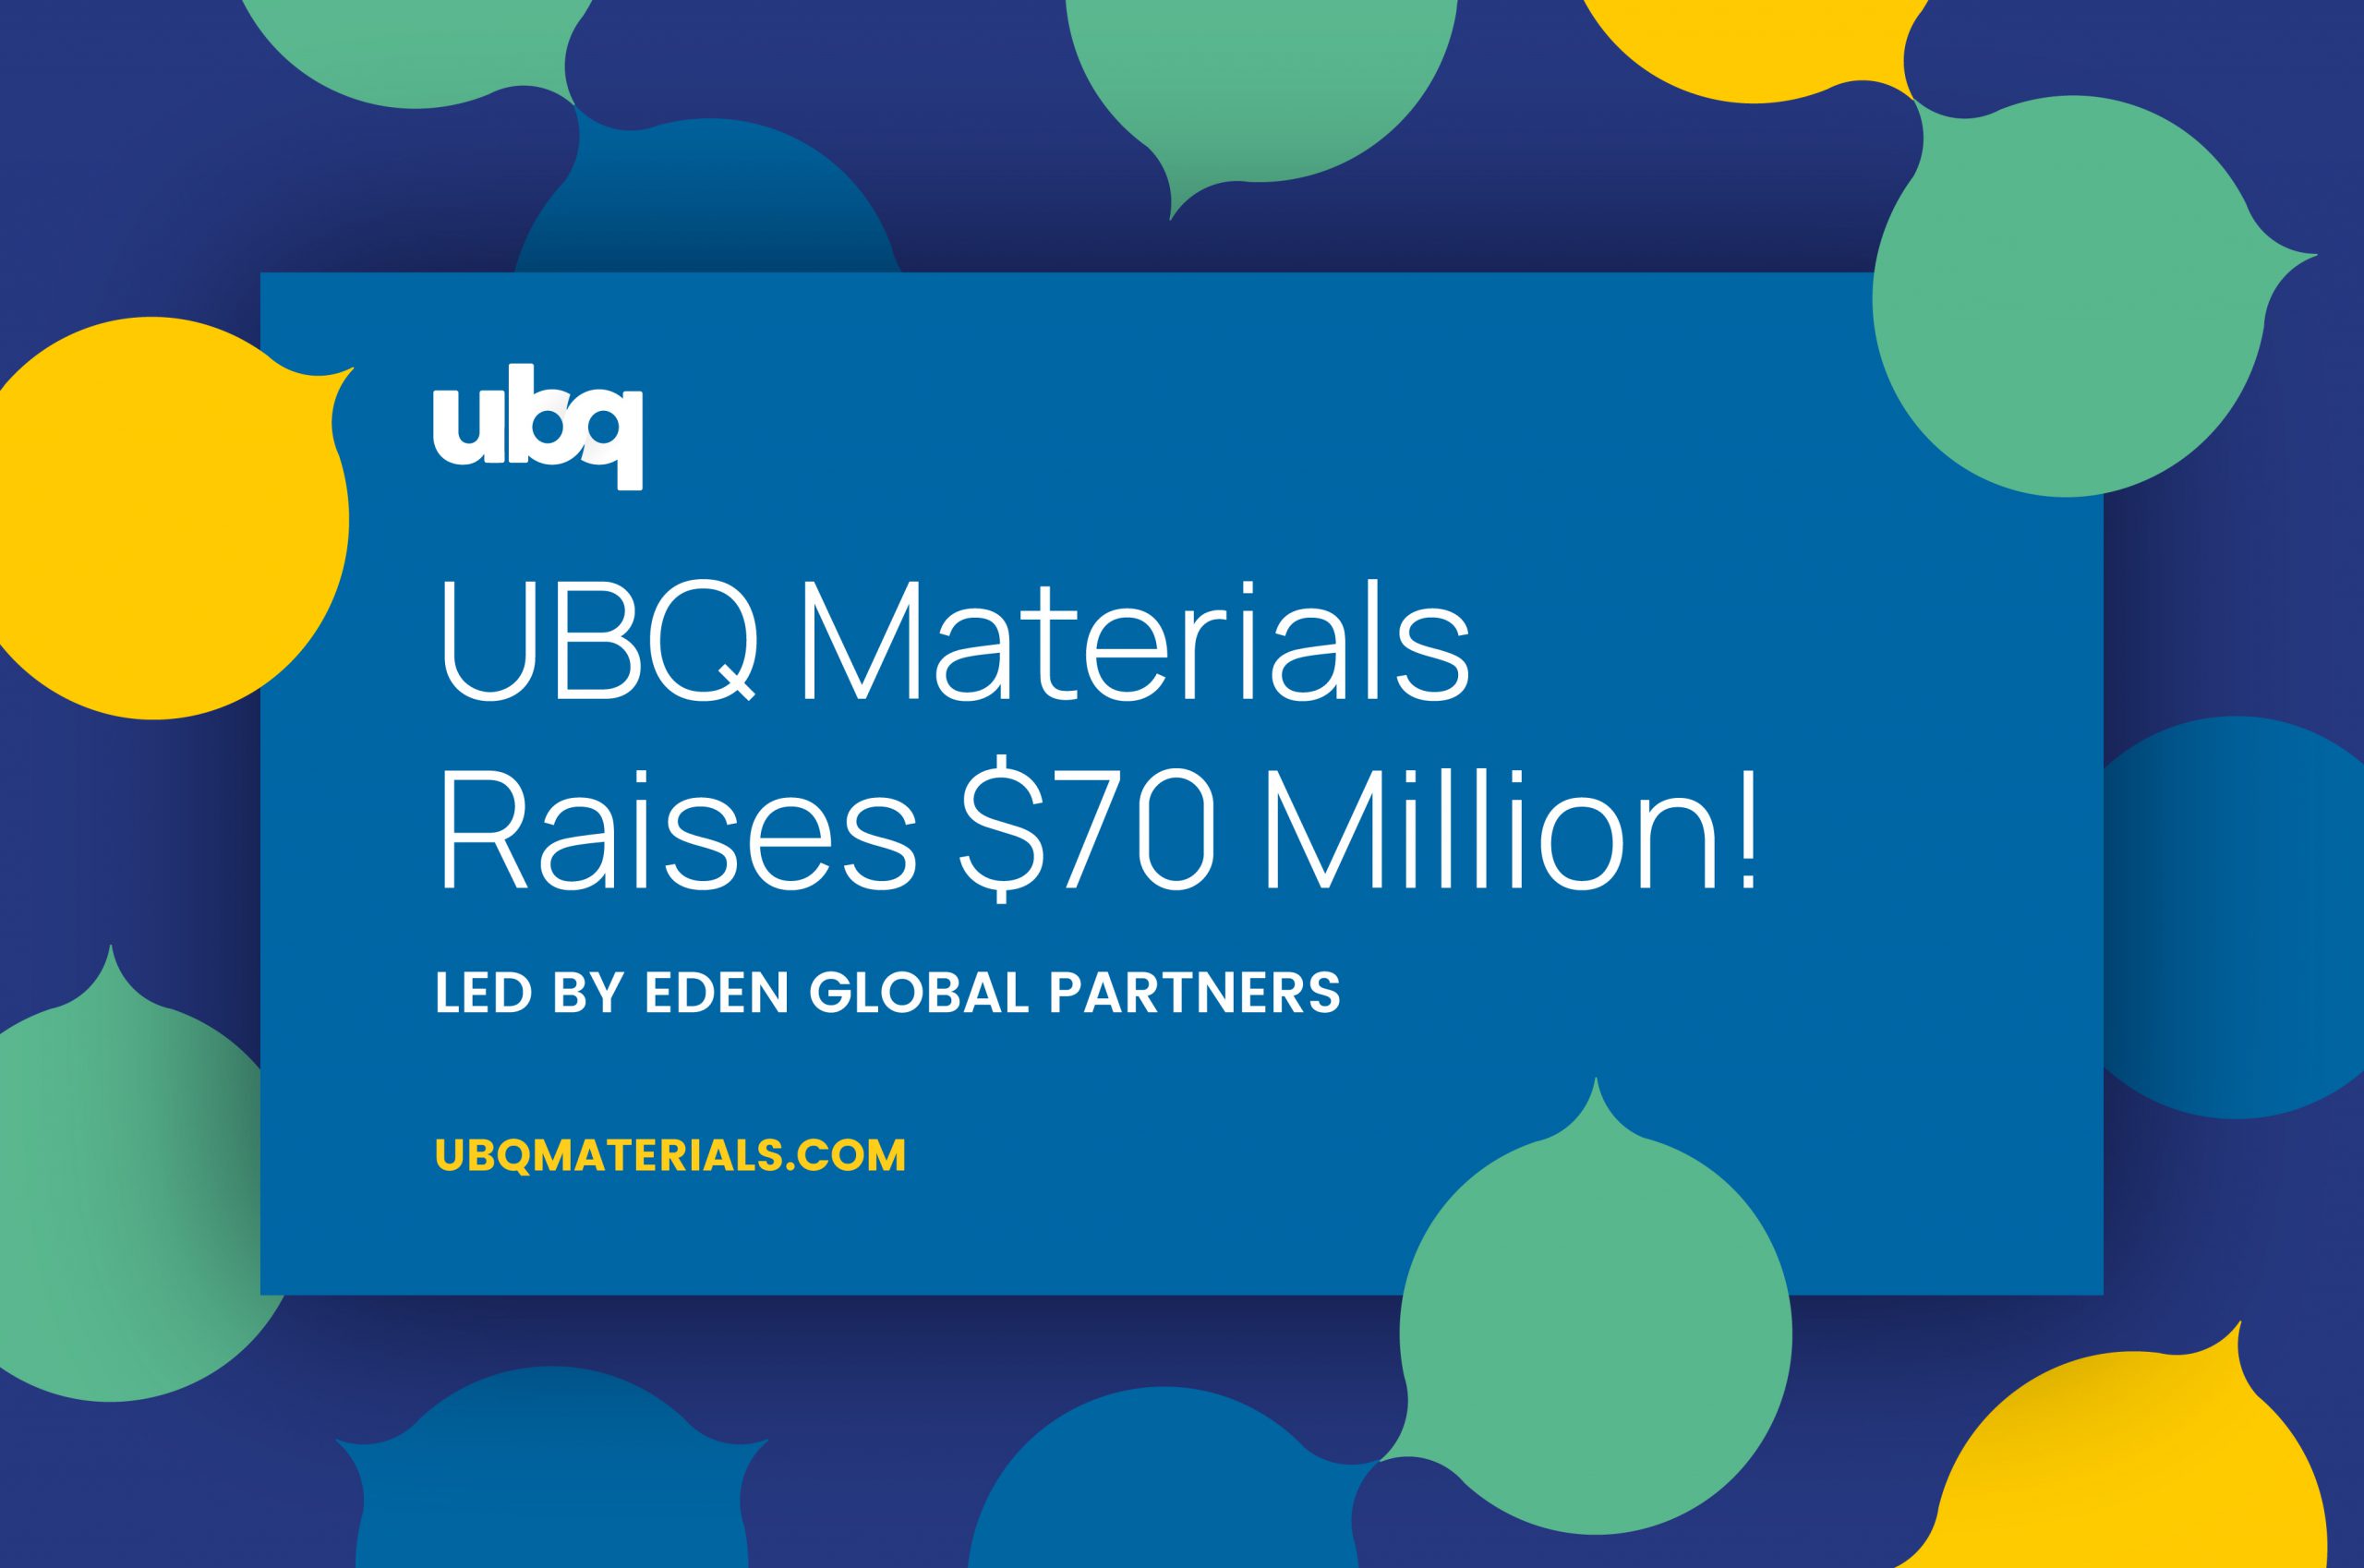 UBQ Materials Raises $70 Million in Funding, Led by Eden Global Partners